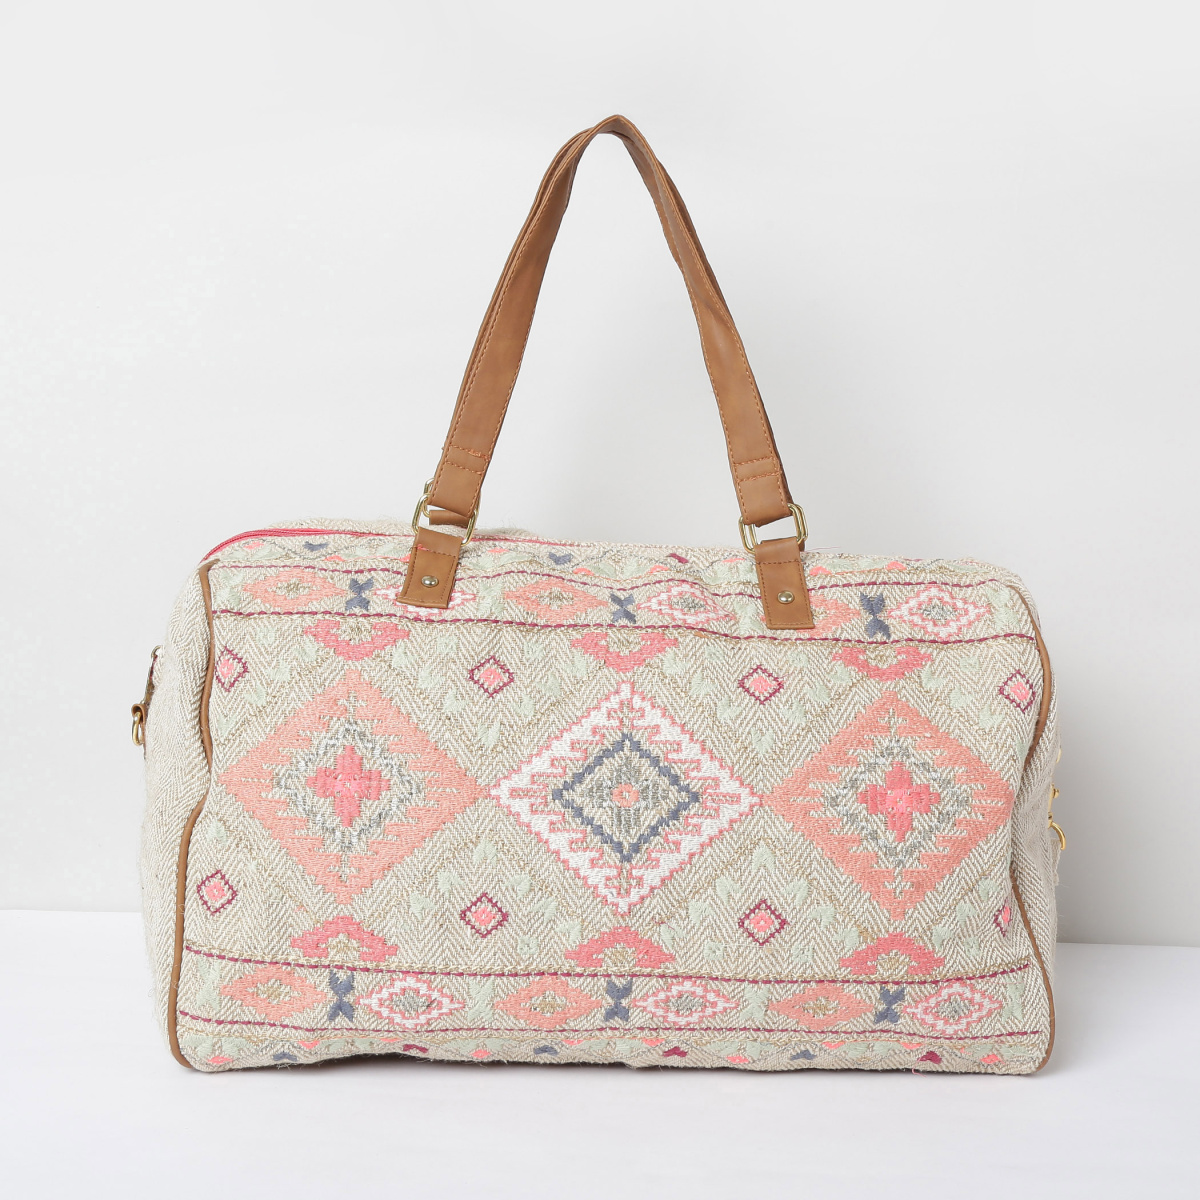 MAX Embroidered Duffle Bag